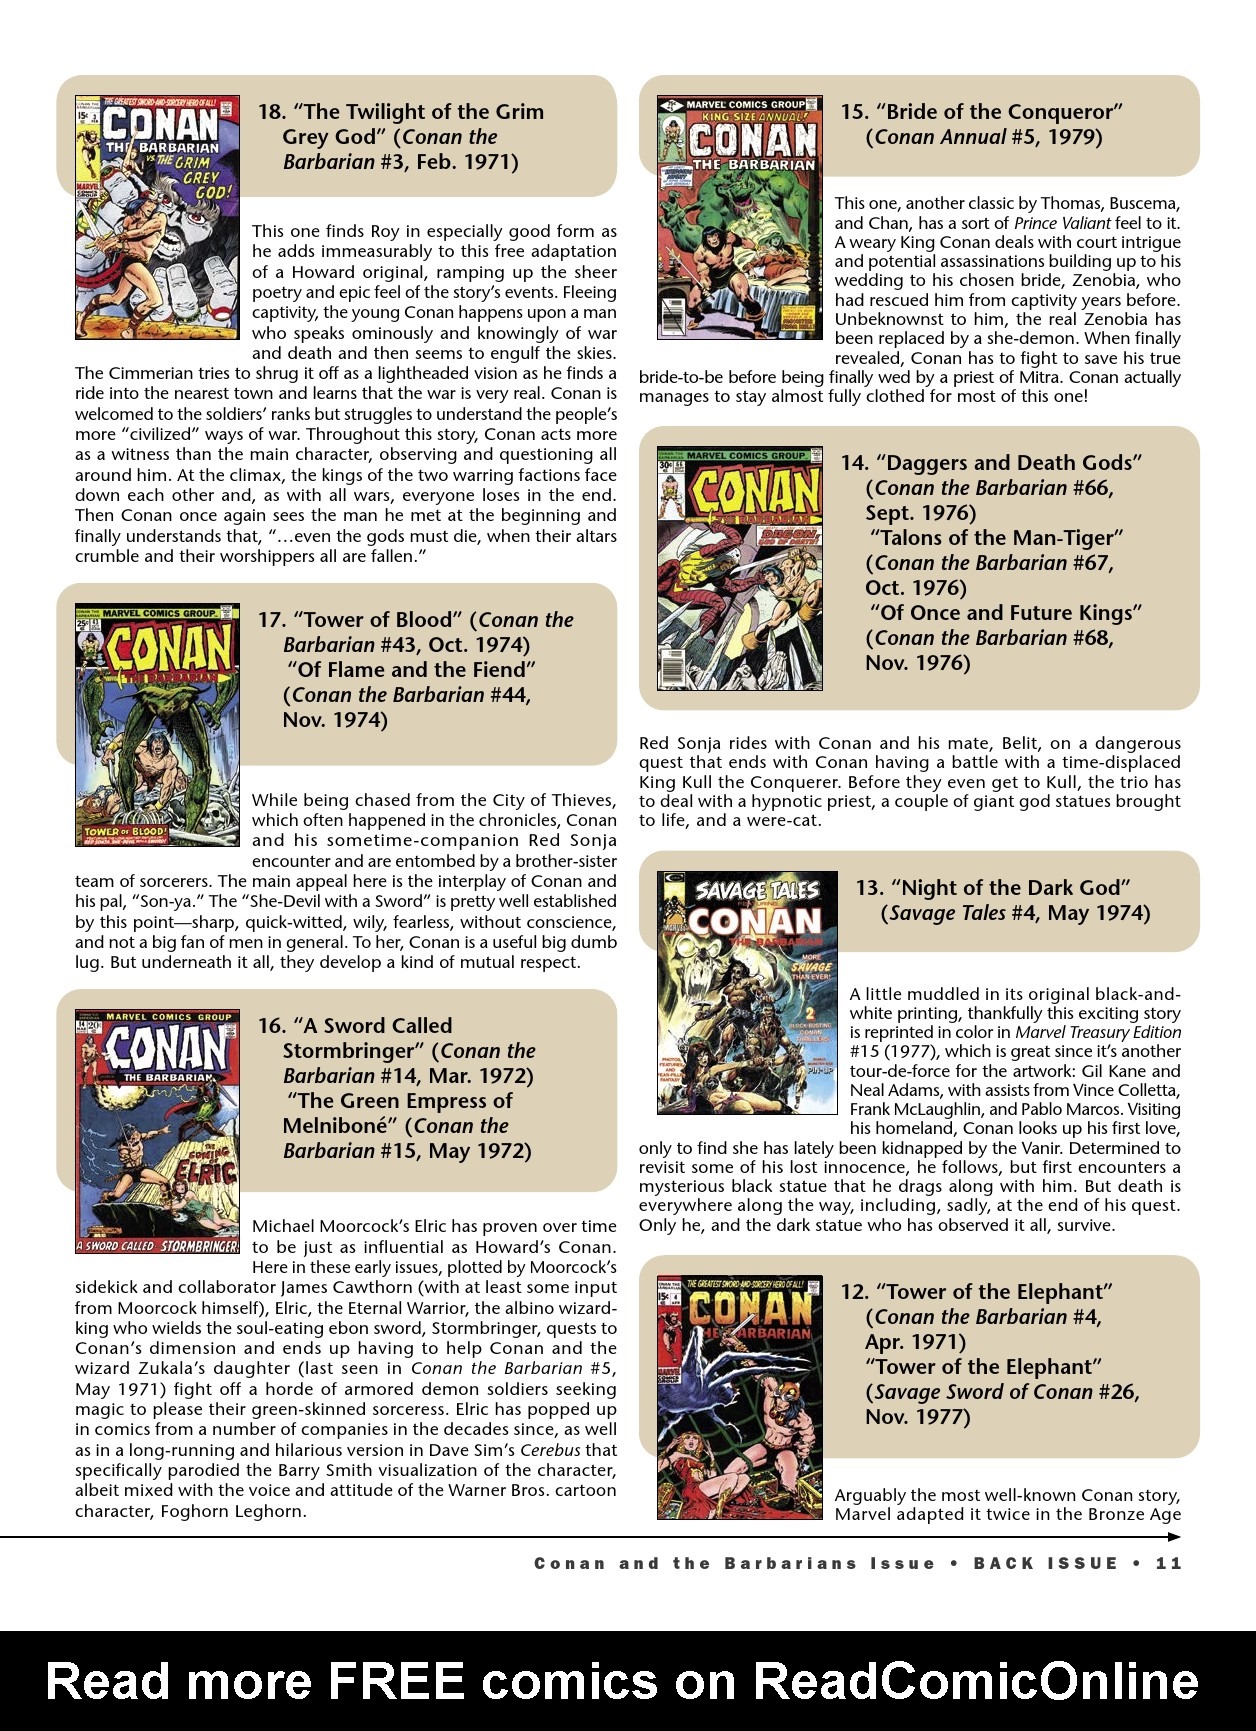 Read online Back Issue comic -  Issue #121 - 13